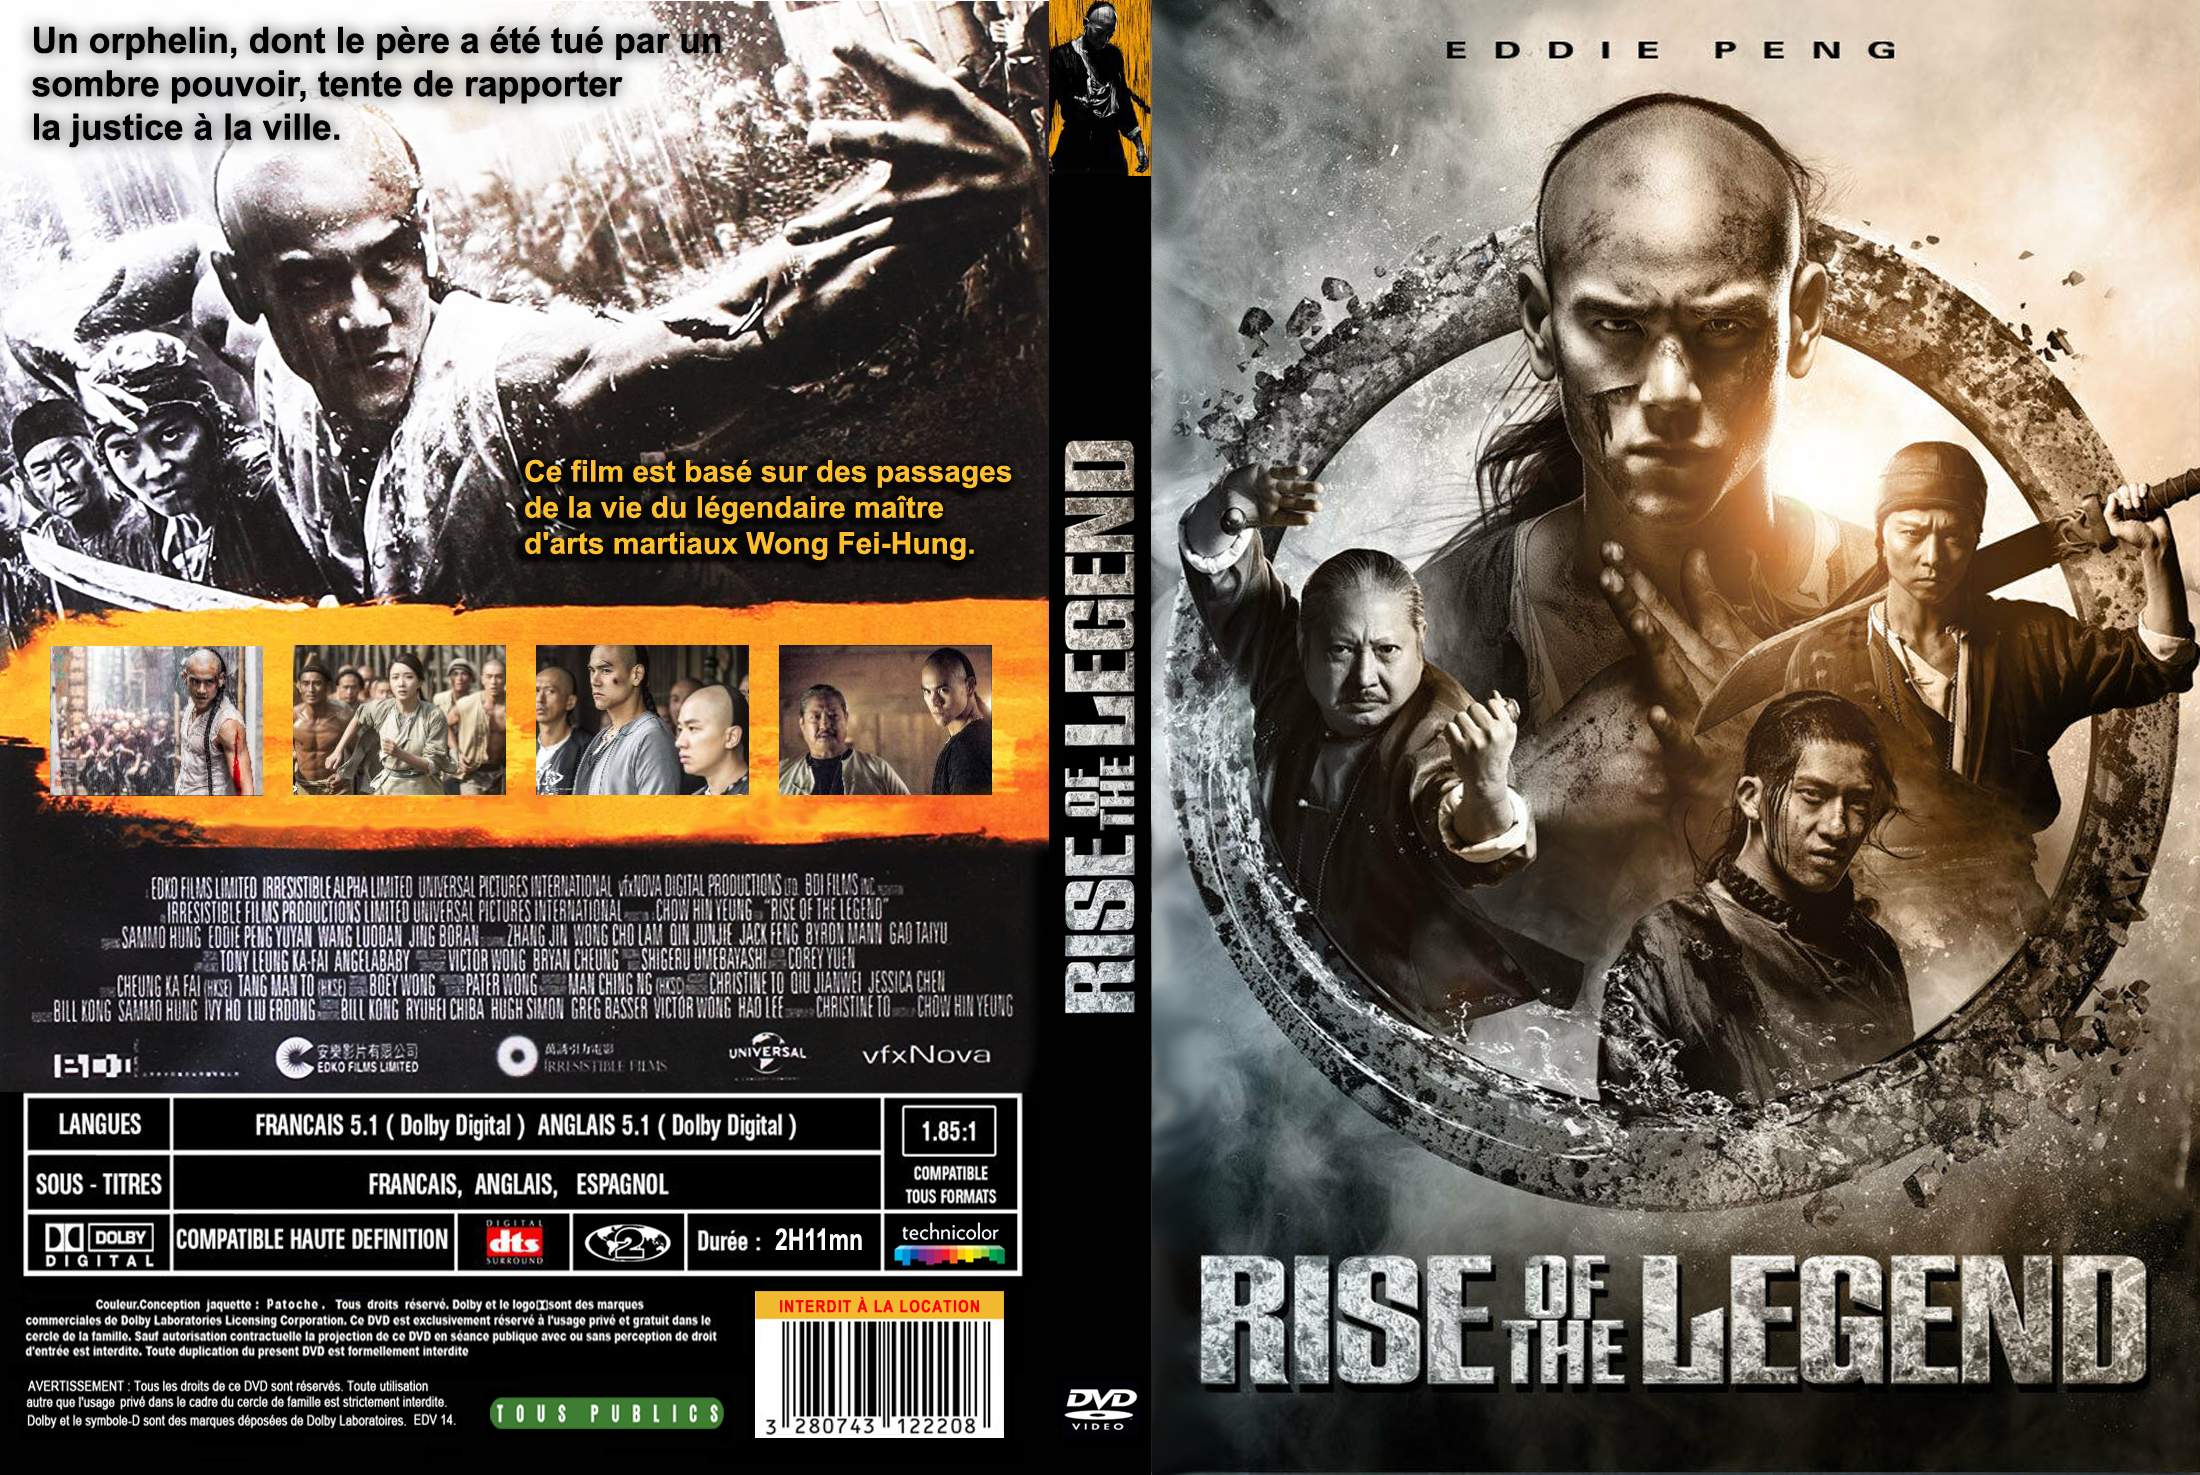 Jaquette DVD Rise of the legend custom